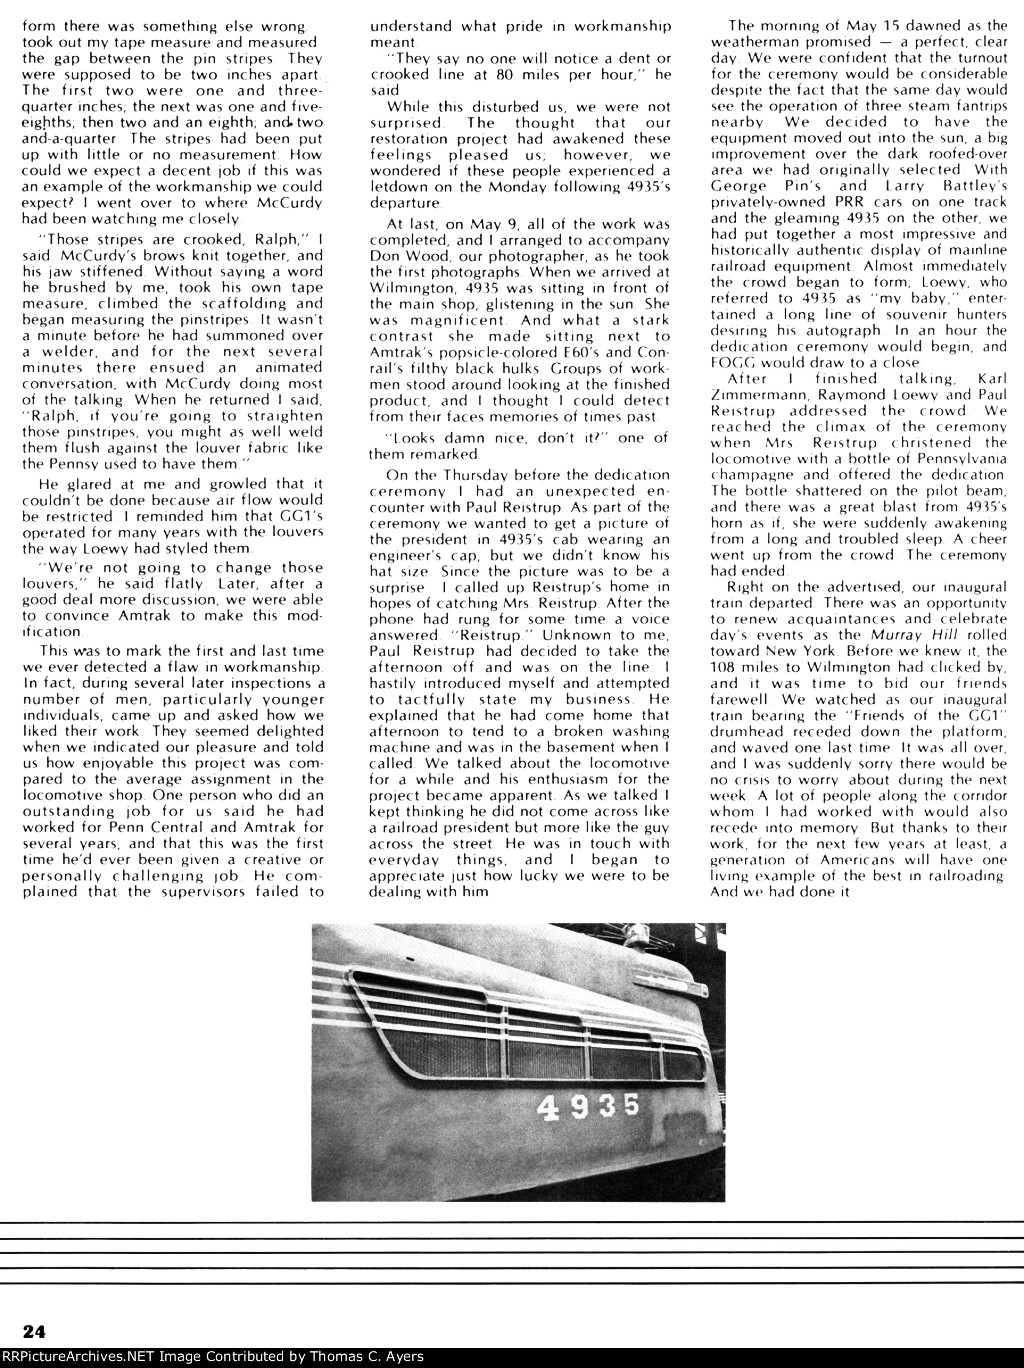 "Taking Of Amtrak 4935," Page 24, 1977